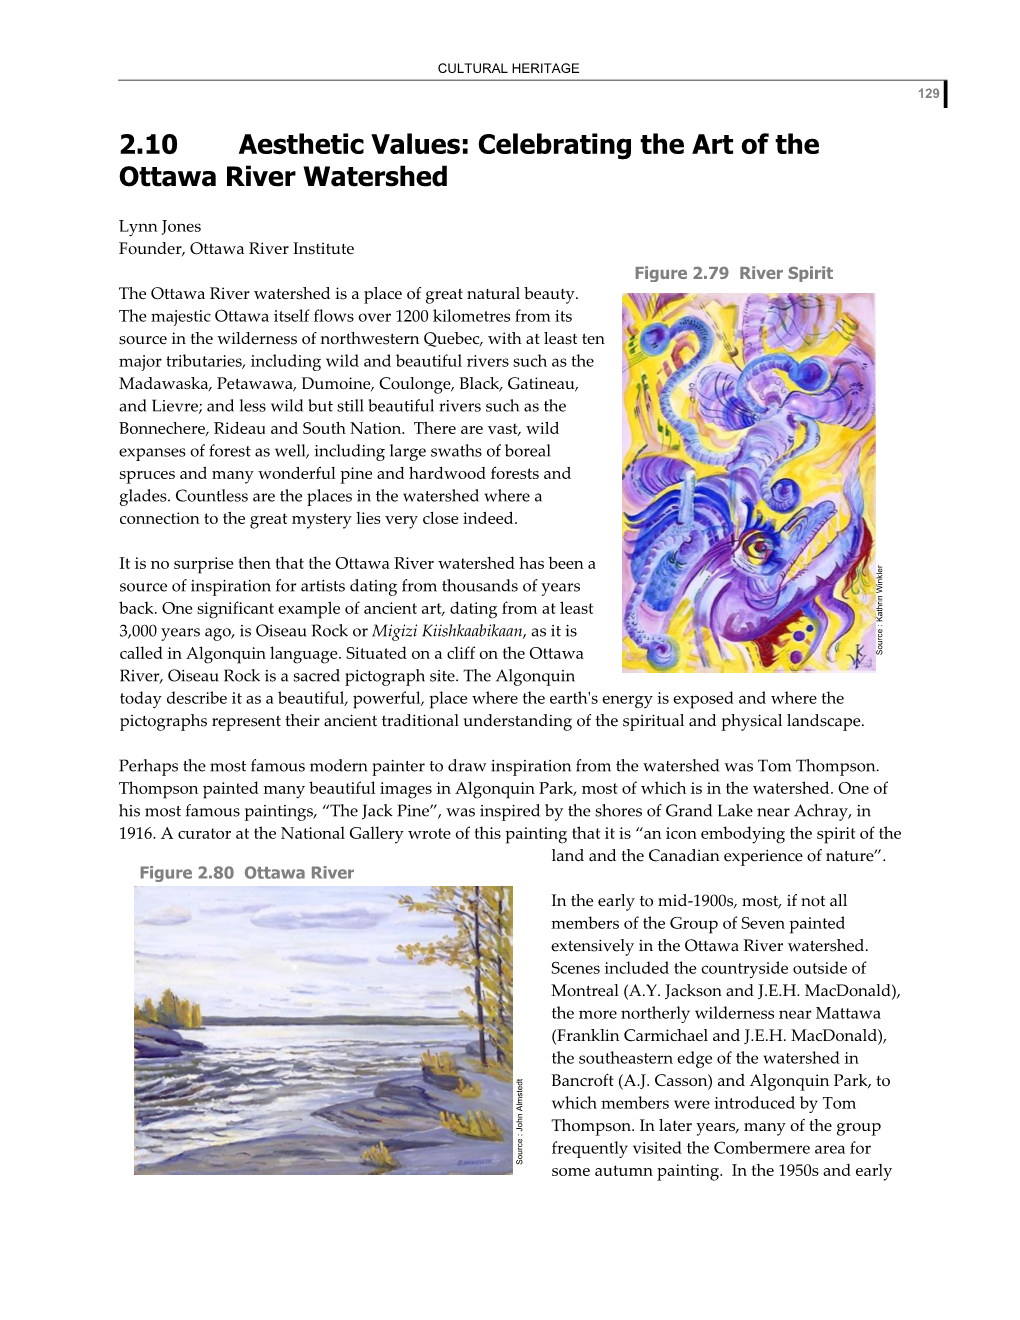 Celebrating the Art of the Ottawa River Watershed